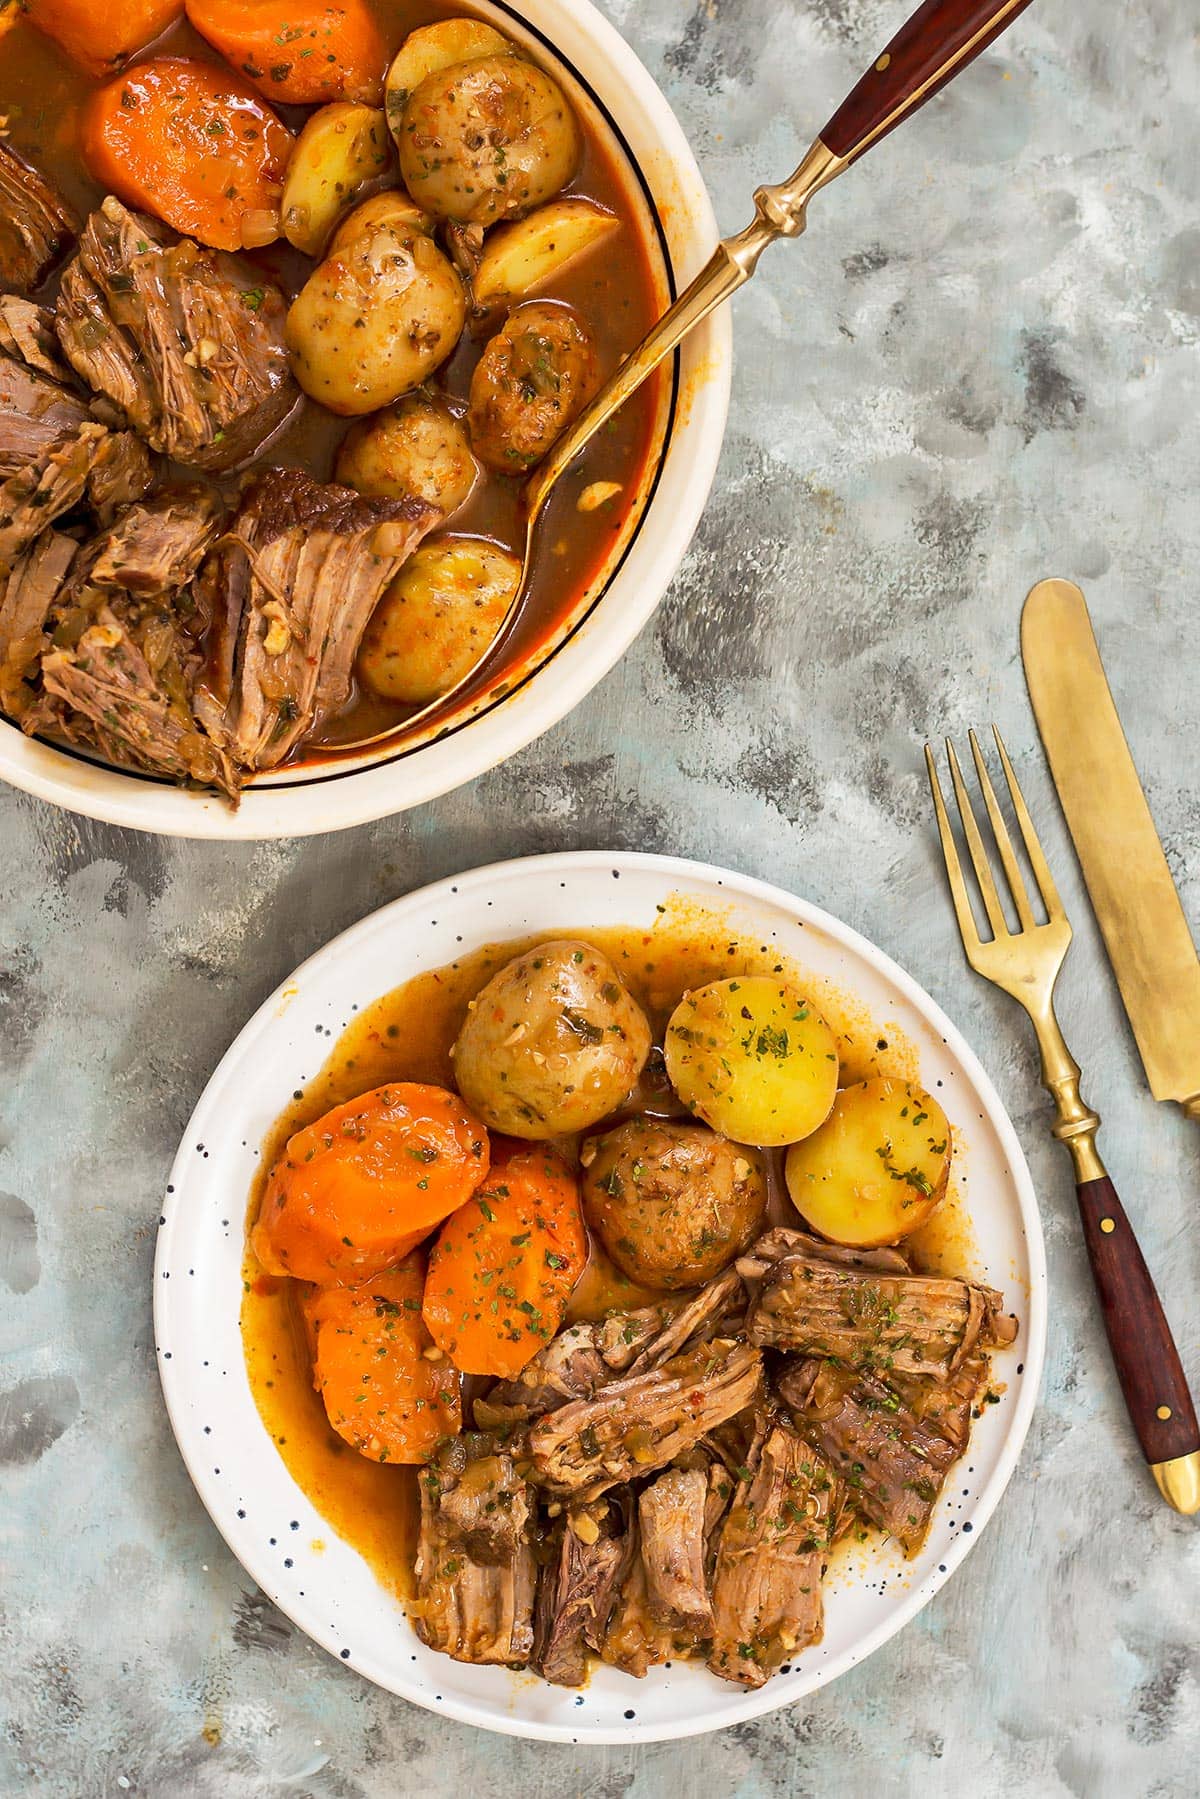 Plate and bowl of slow cooker pot roast with carrots and potatoes